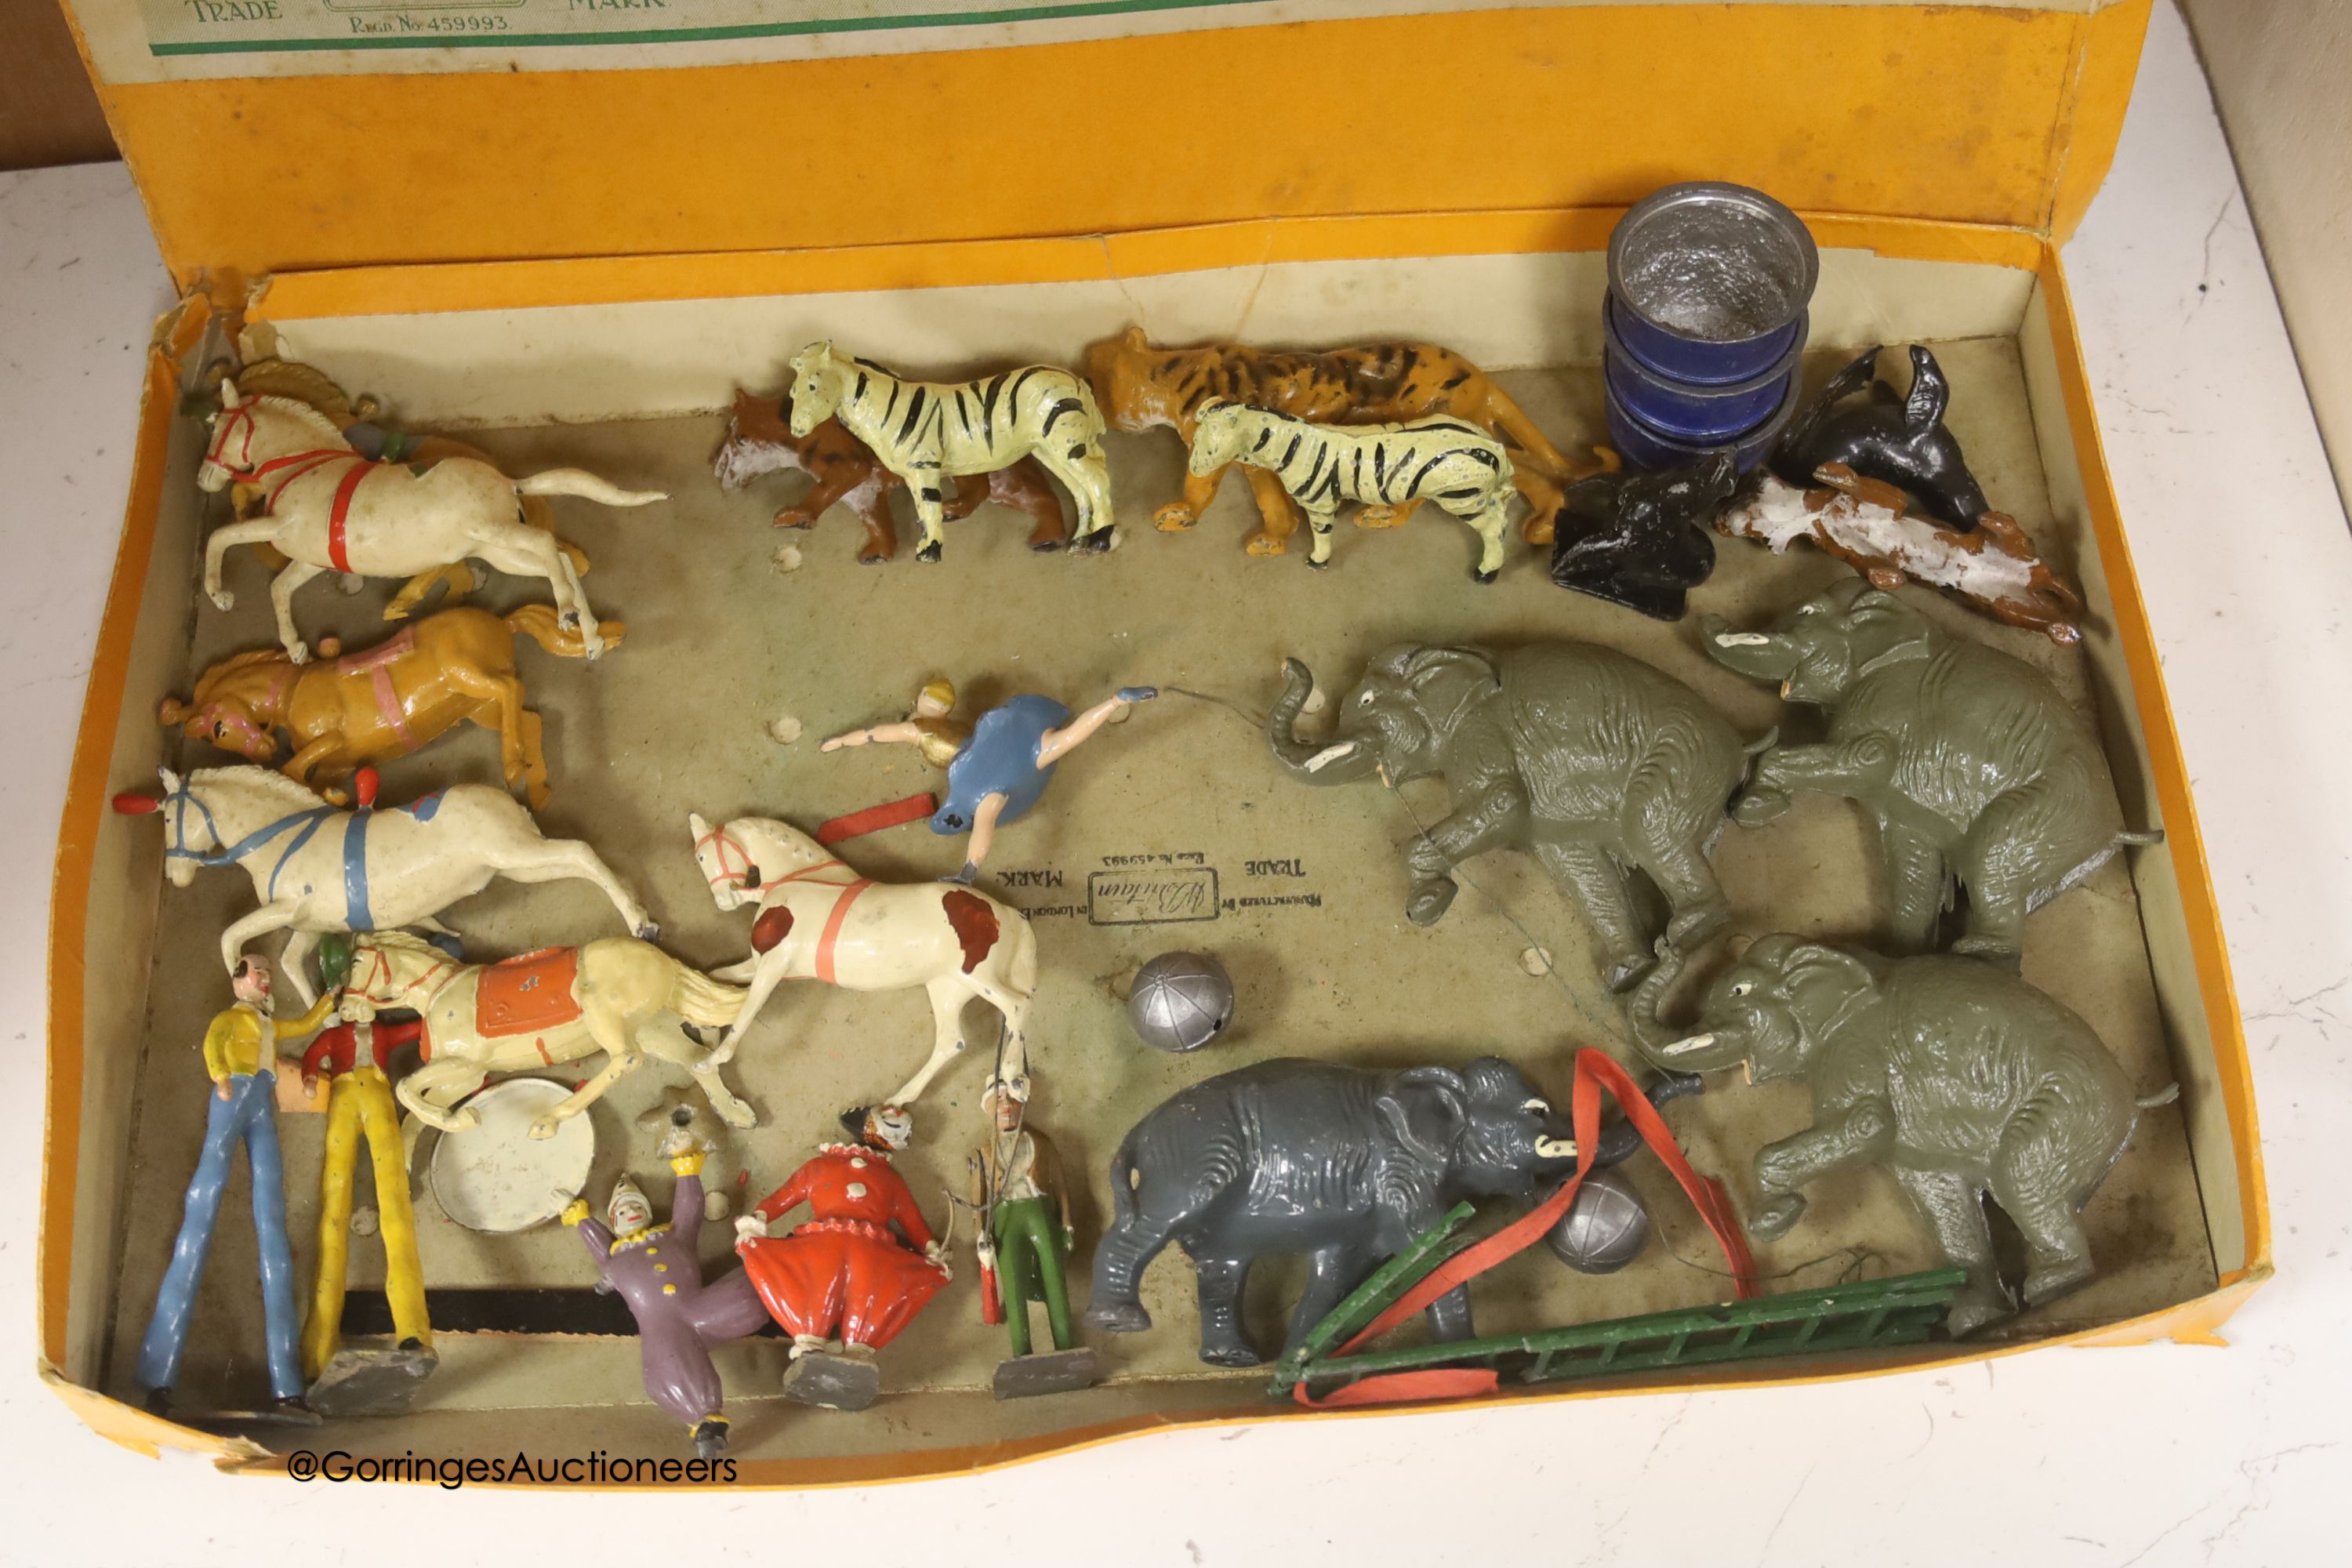 A Britain's Set 1443 Mammoth Circus, 1936-41, in original box and further related items - Image 2 of 5